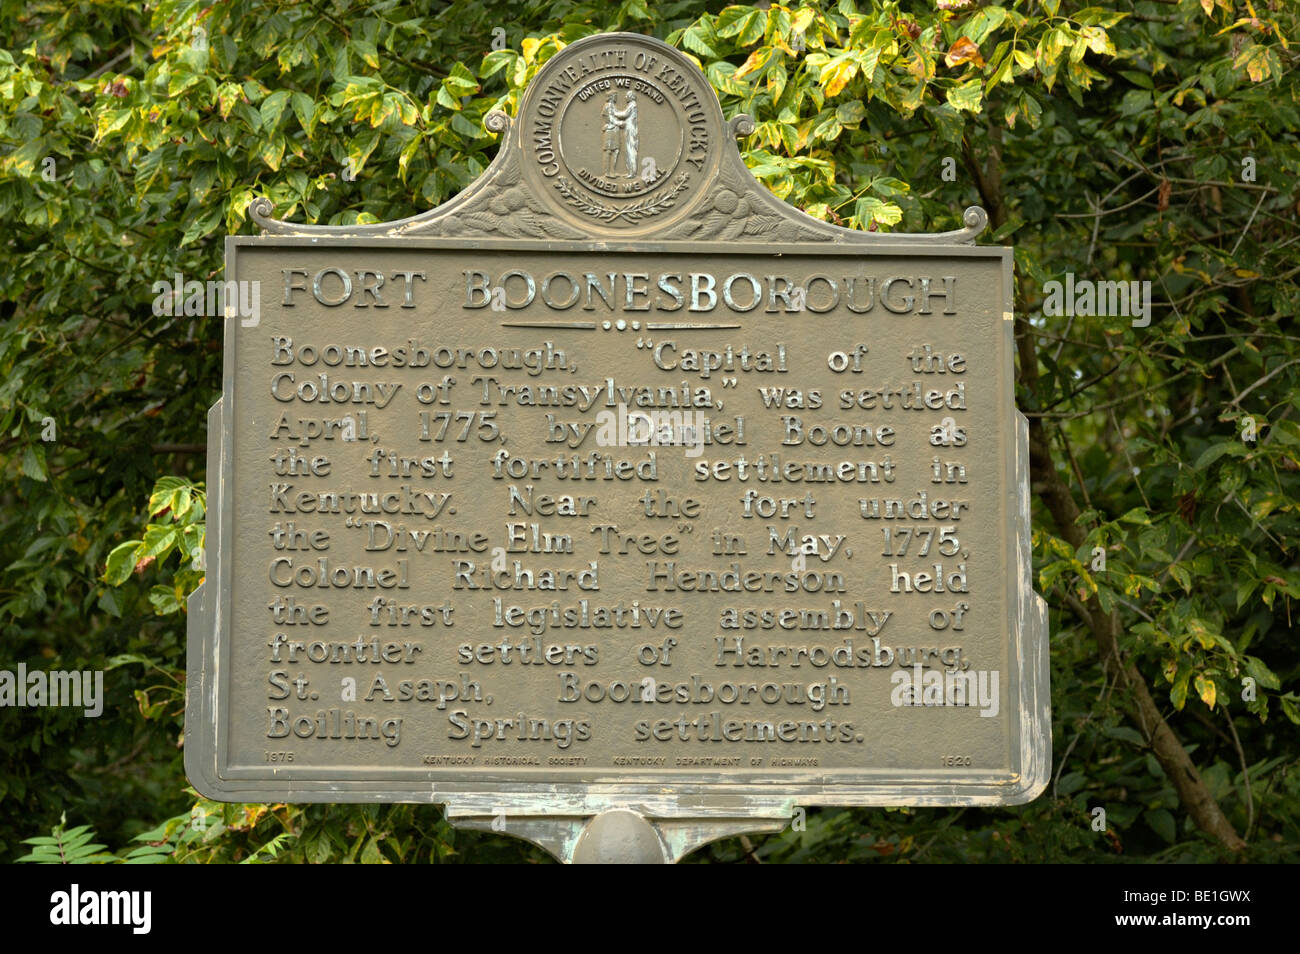 State historic marker roadside plaque for Fort Boonesborough Kentucky, USA Stock Photo